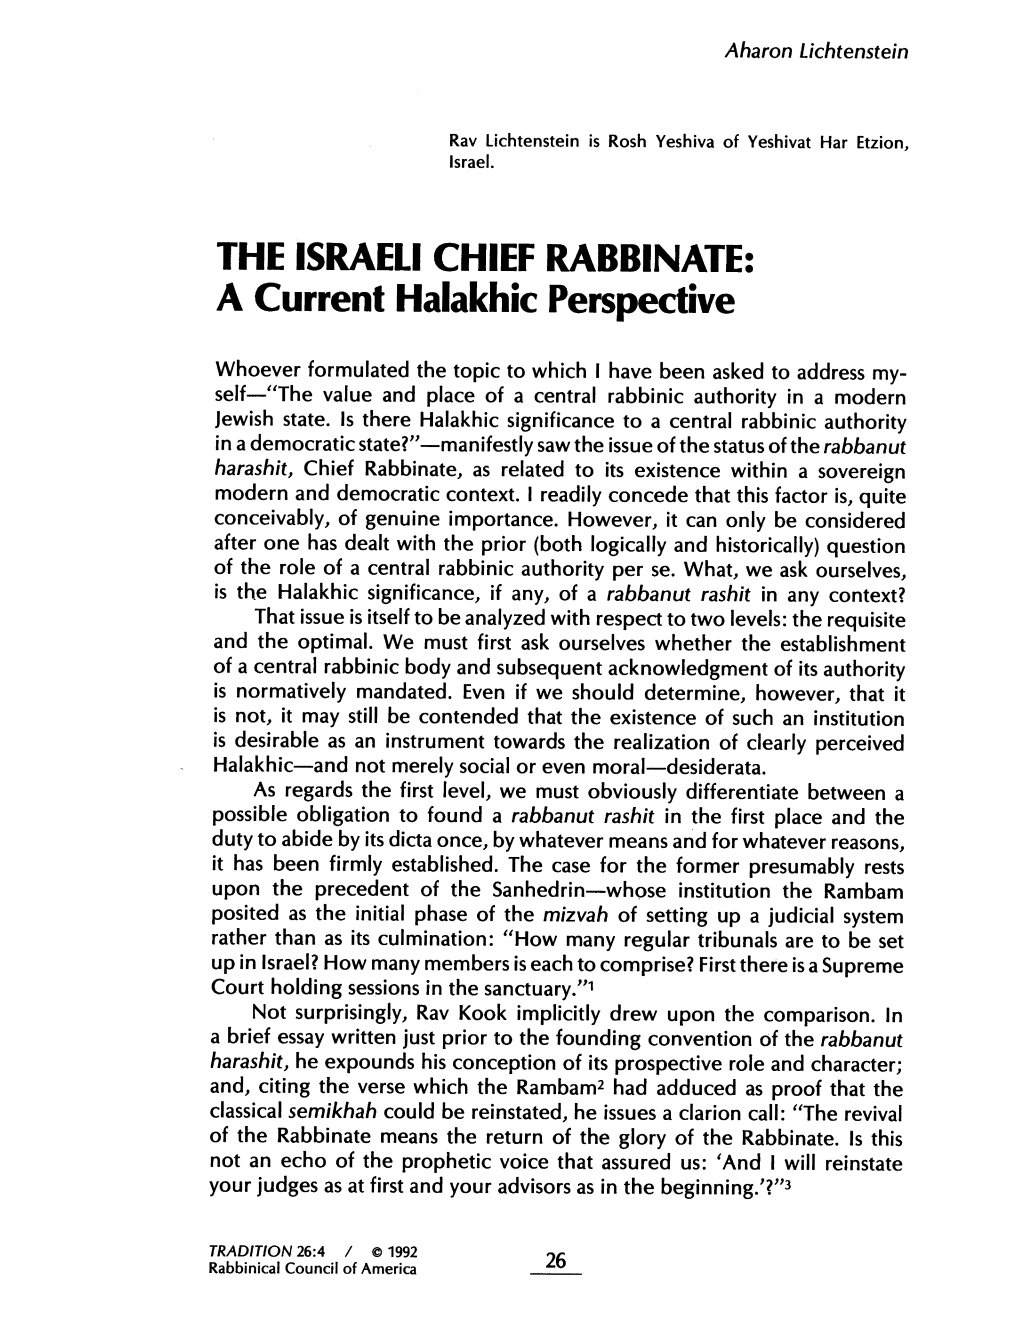 THE ISRAELI CHIEF RABBINATE: a Current Halakhic Perspective